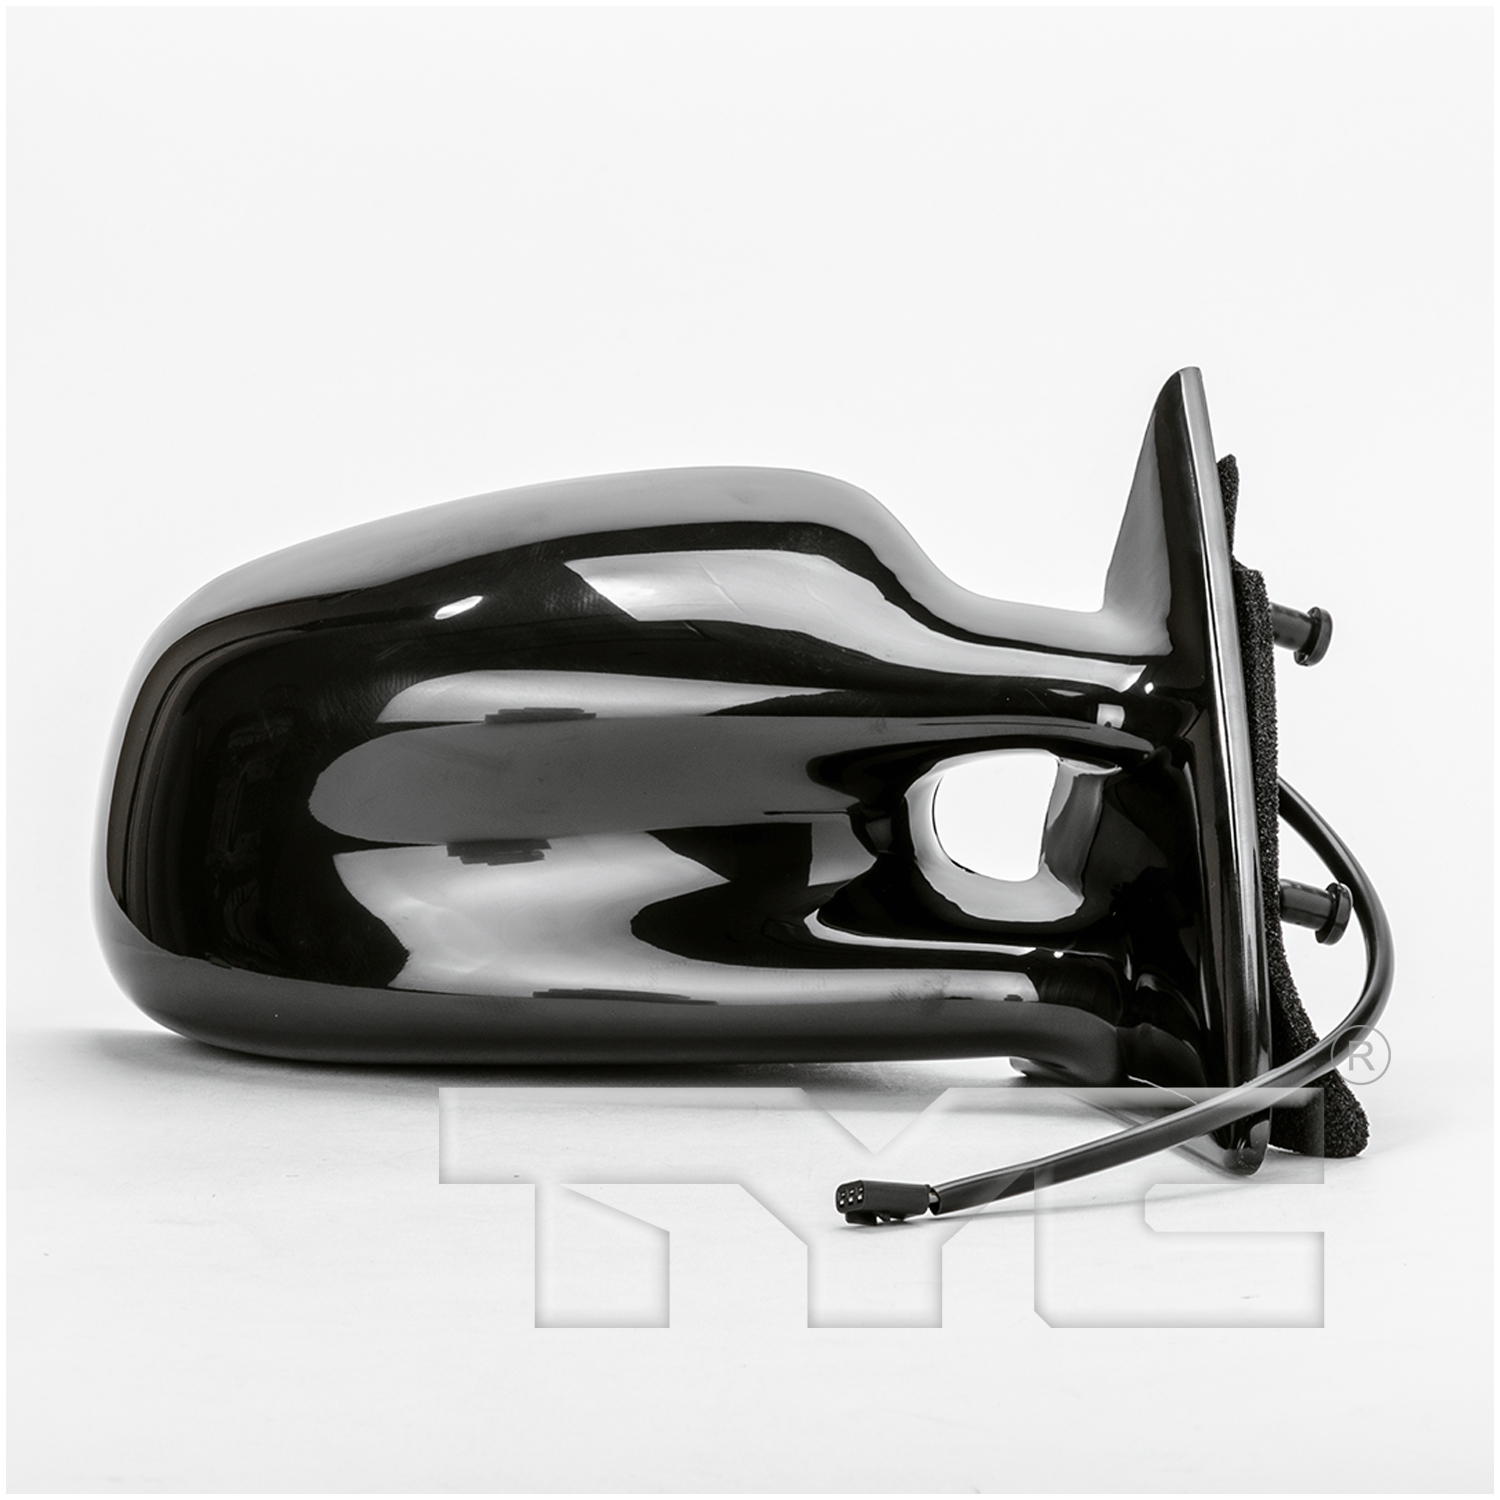 Aftermarket MIRRORS for PONTIAC - GRAND AM, GRAND AM,99-01,RT Mirror outside rear view